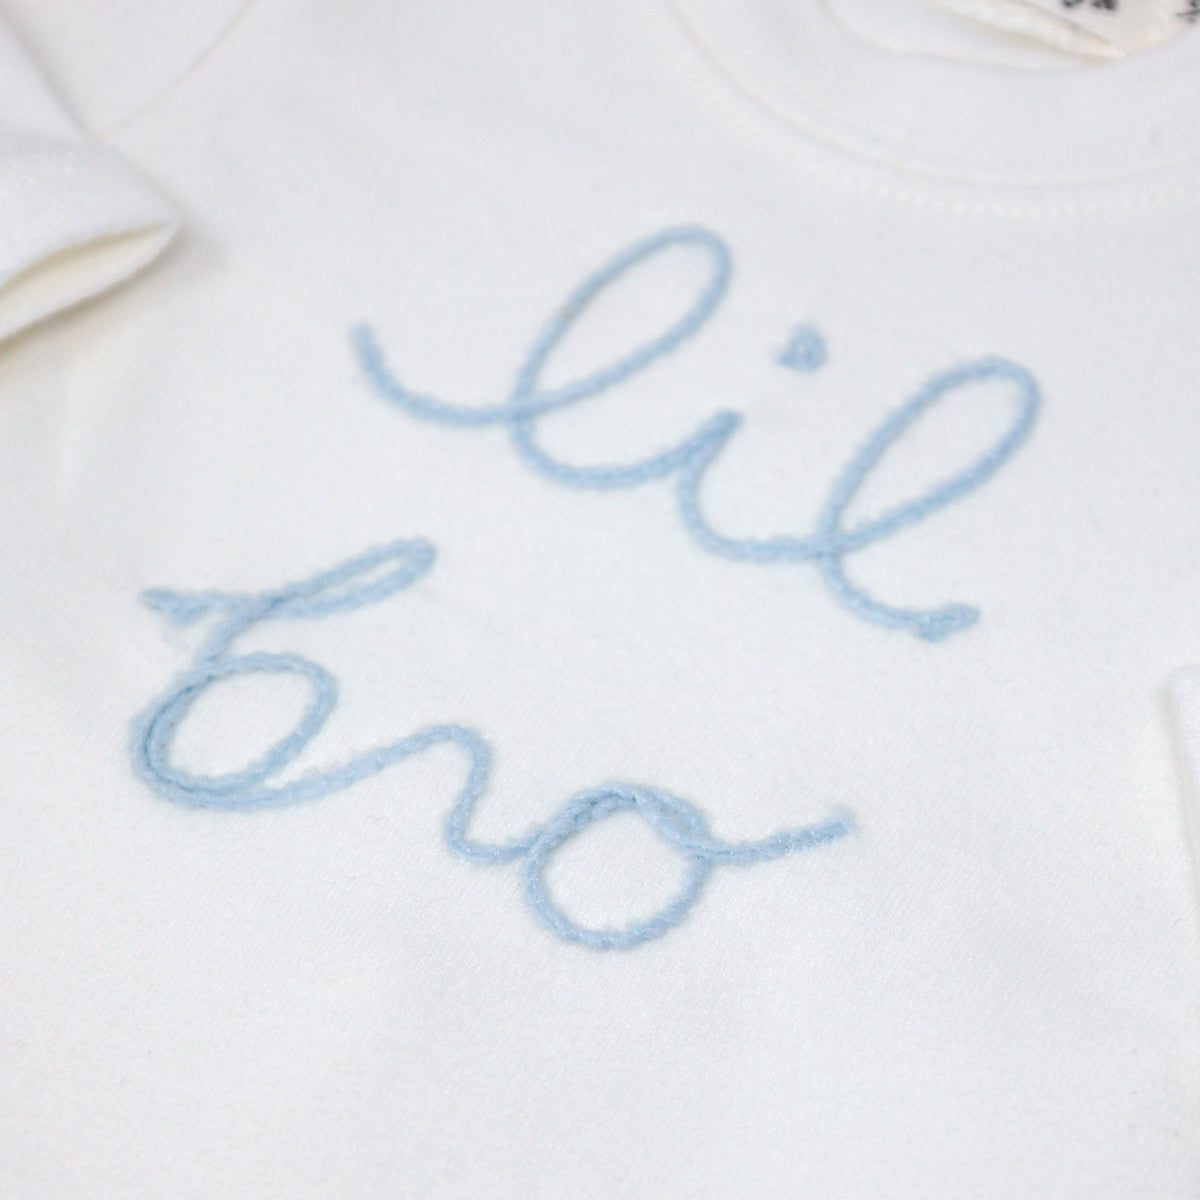 oh baby! Two Piece Set "lil bro" in Sky Blue Yarn - Cream